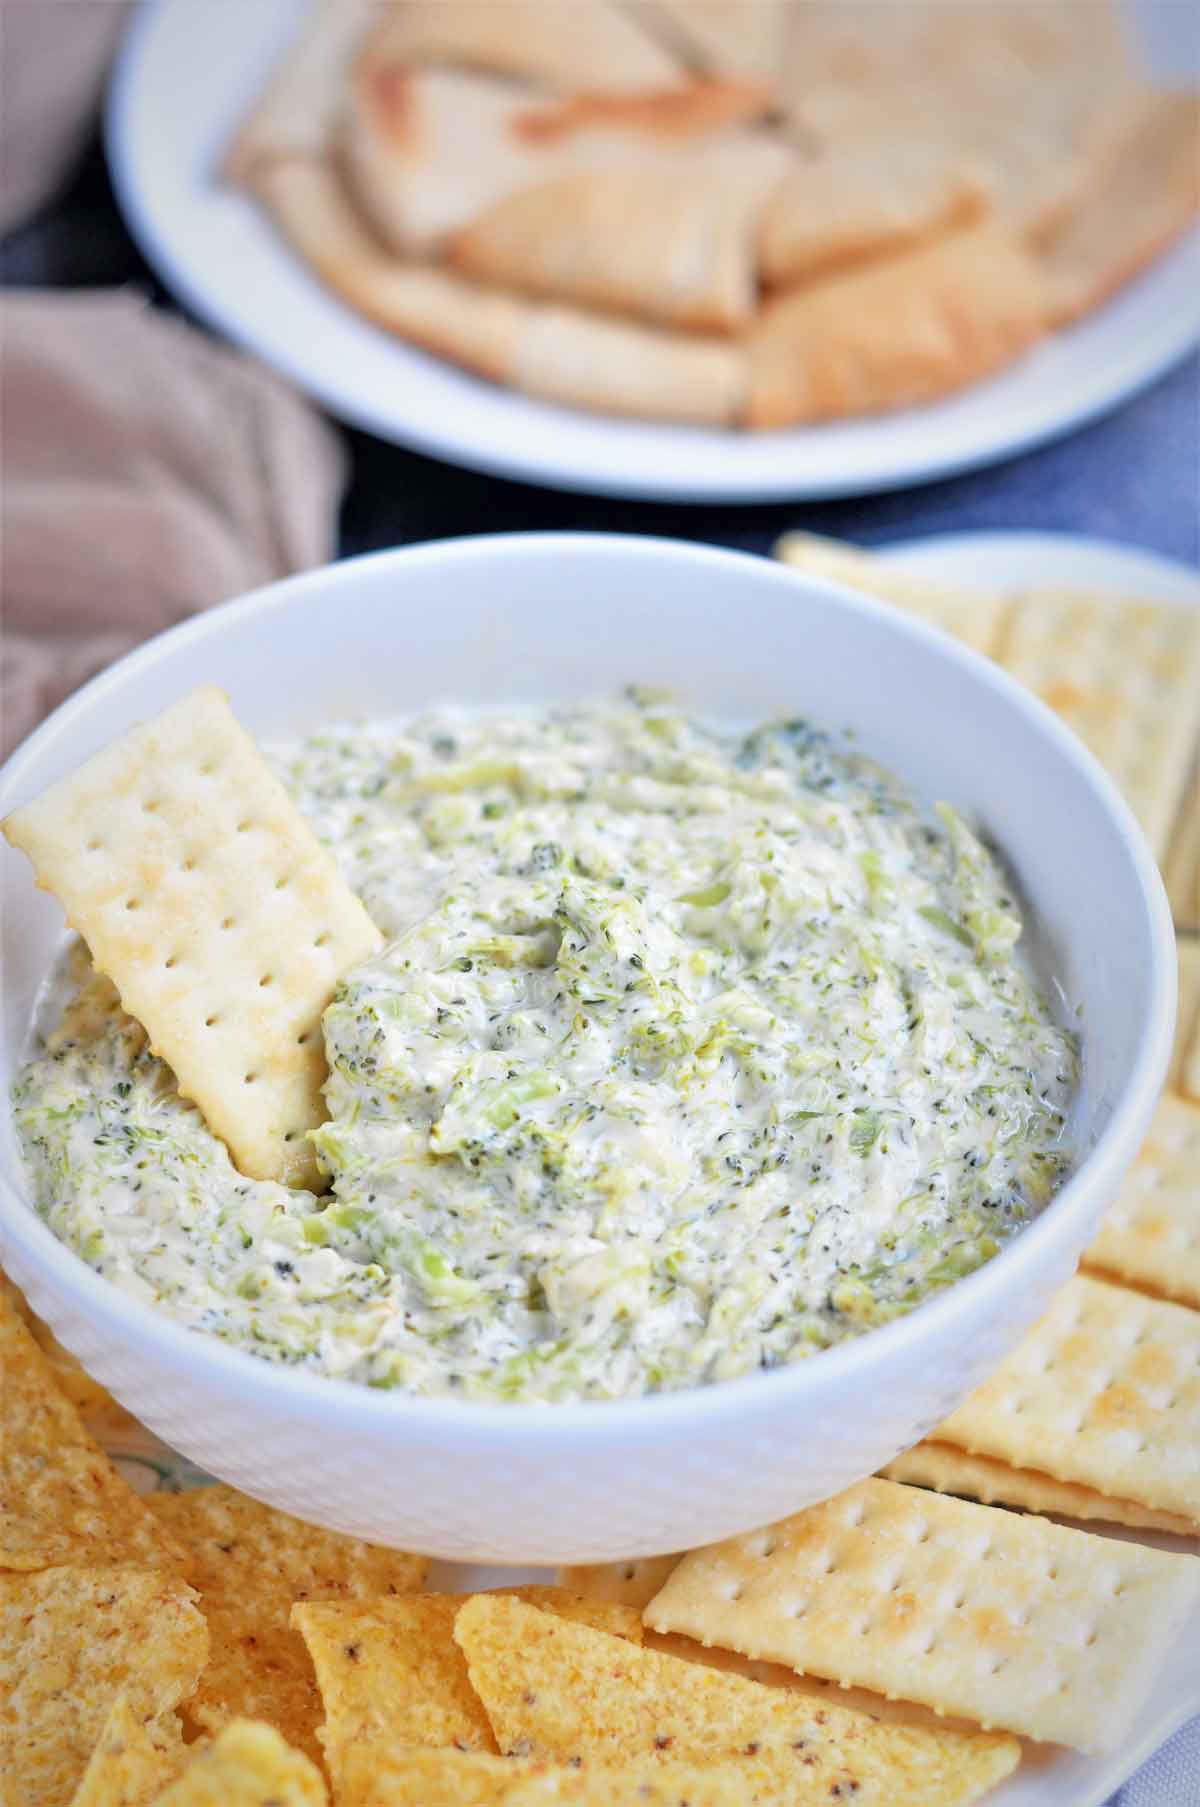 Broccoli cheese dip in a bowl served with crackers.